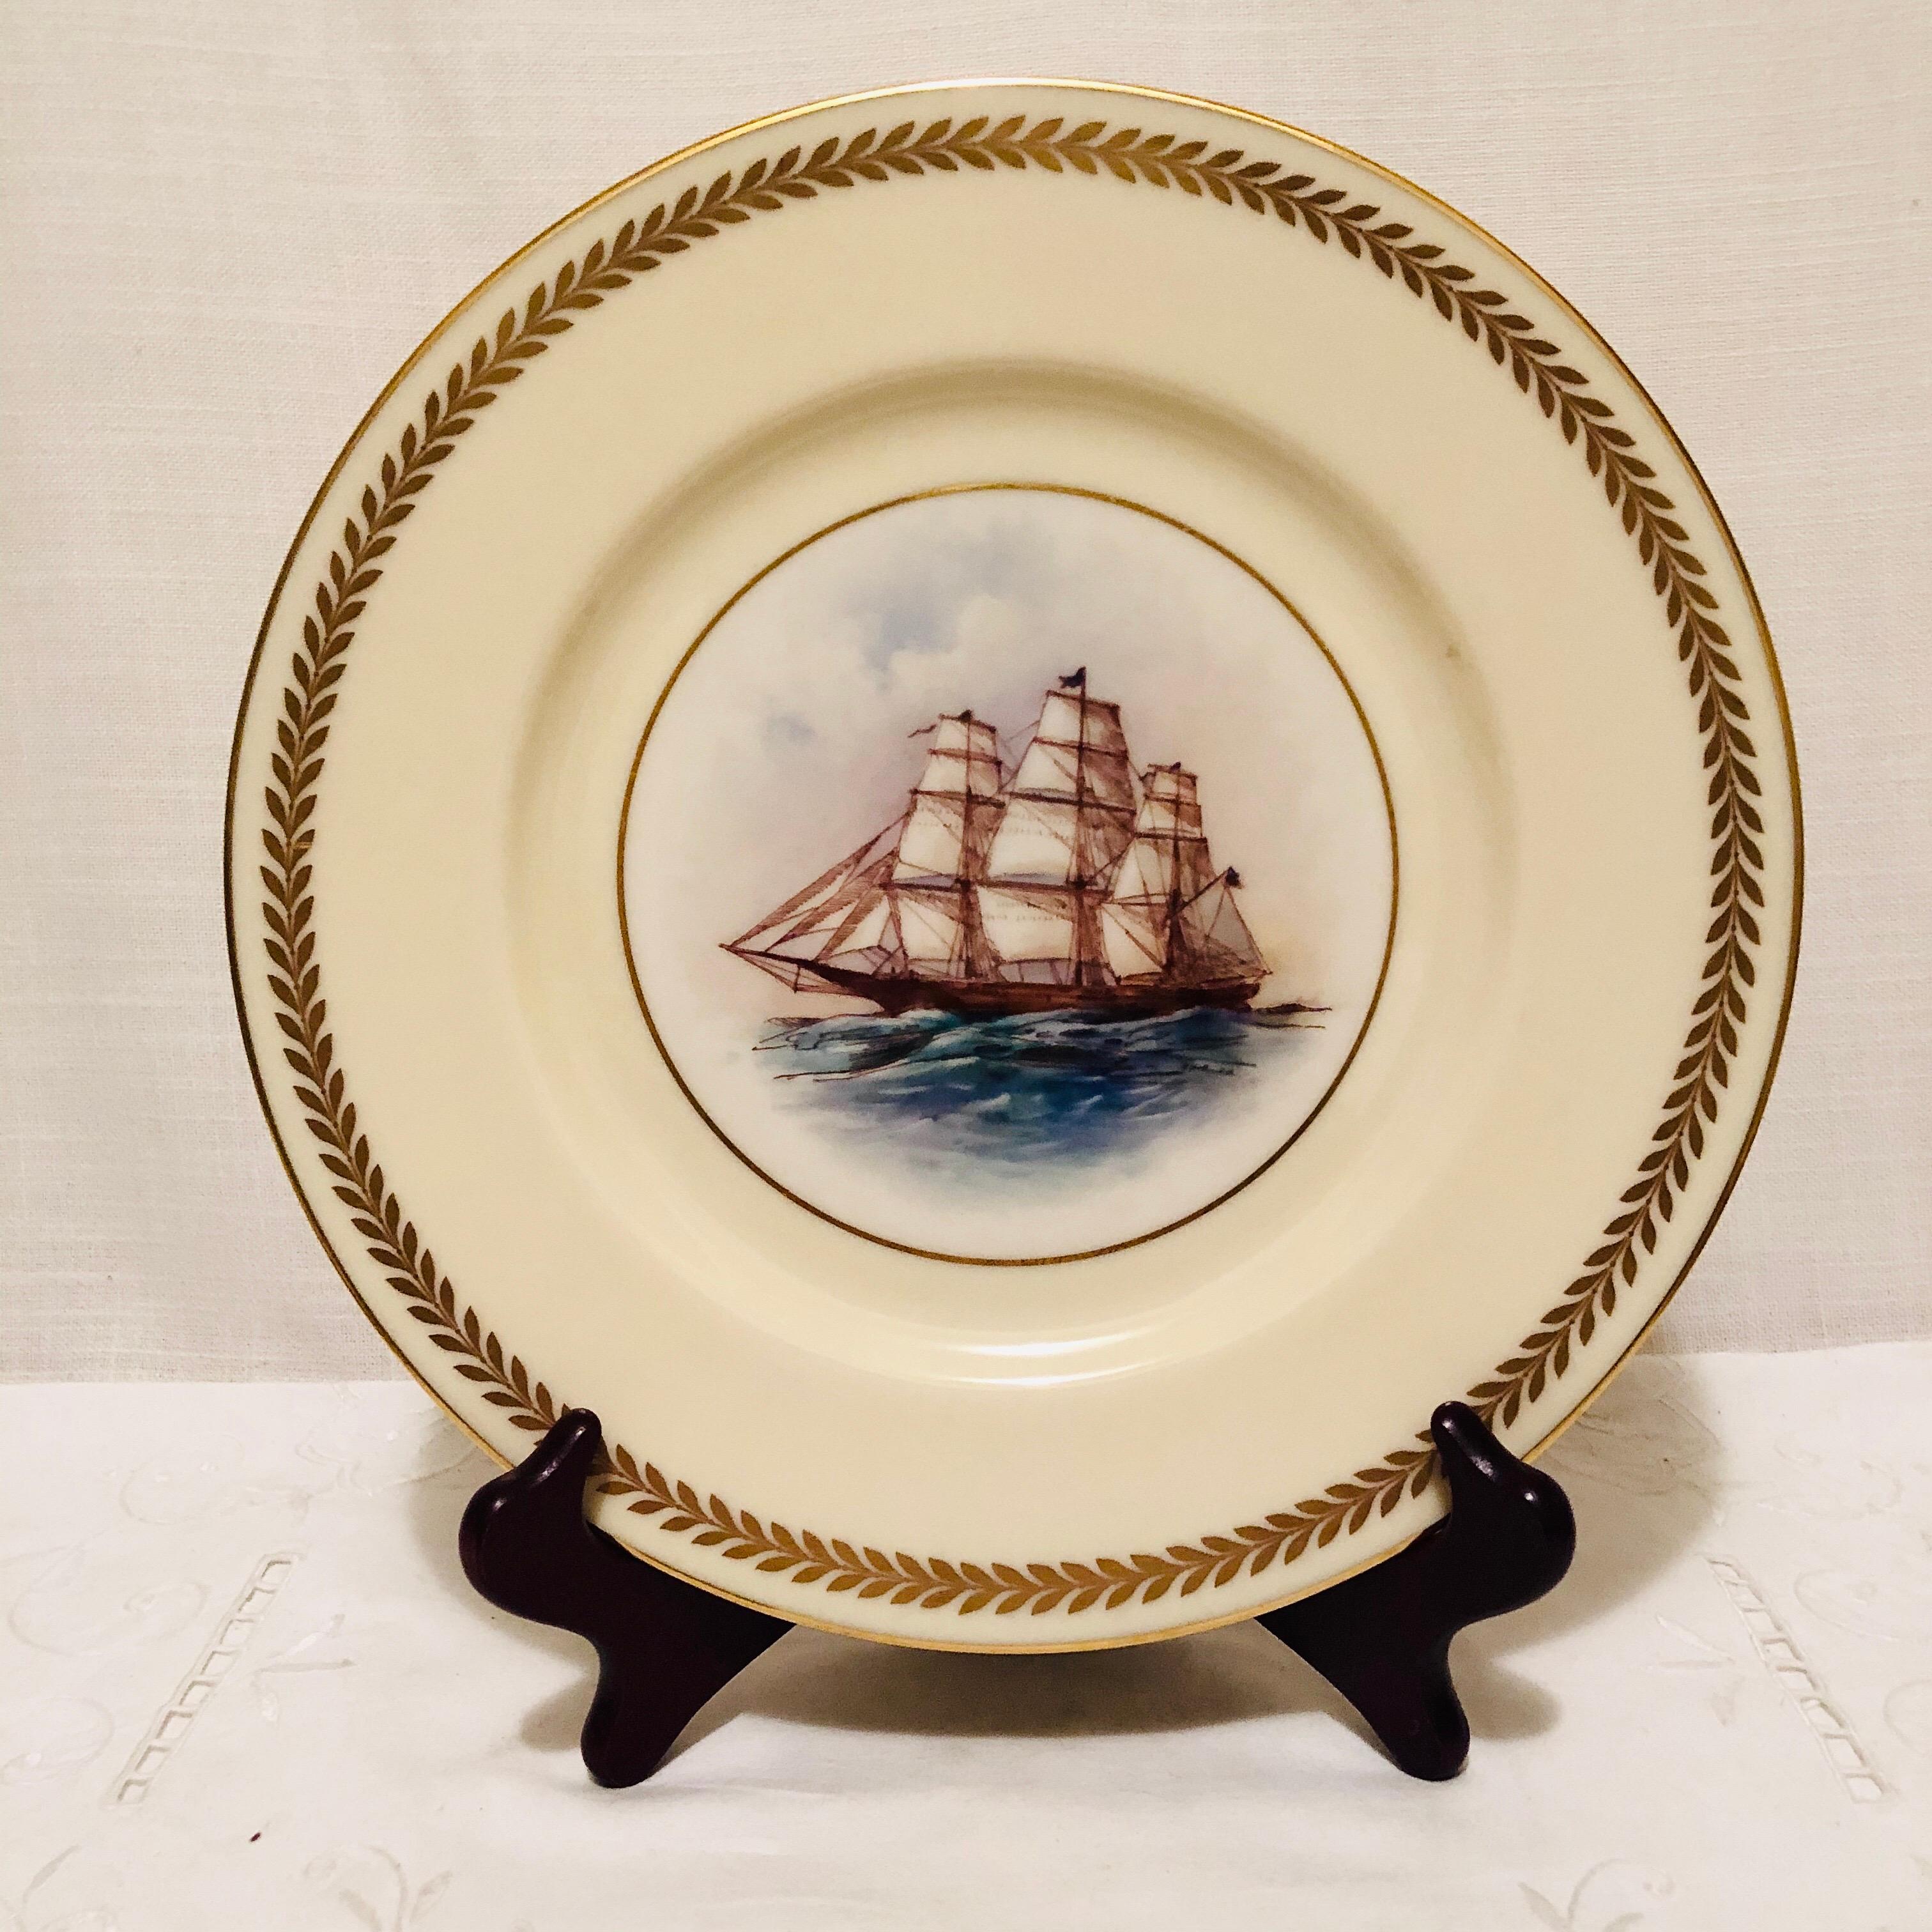 Porcelain Set of Twelve Lenox Plates Each Hand Painted with a Different Tall Ship